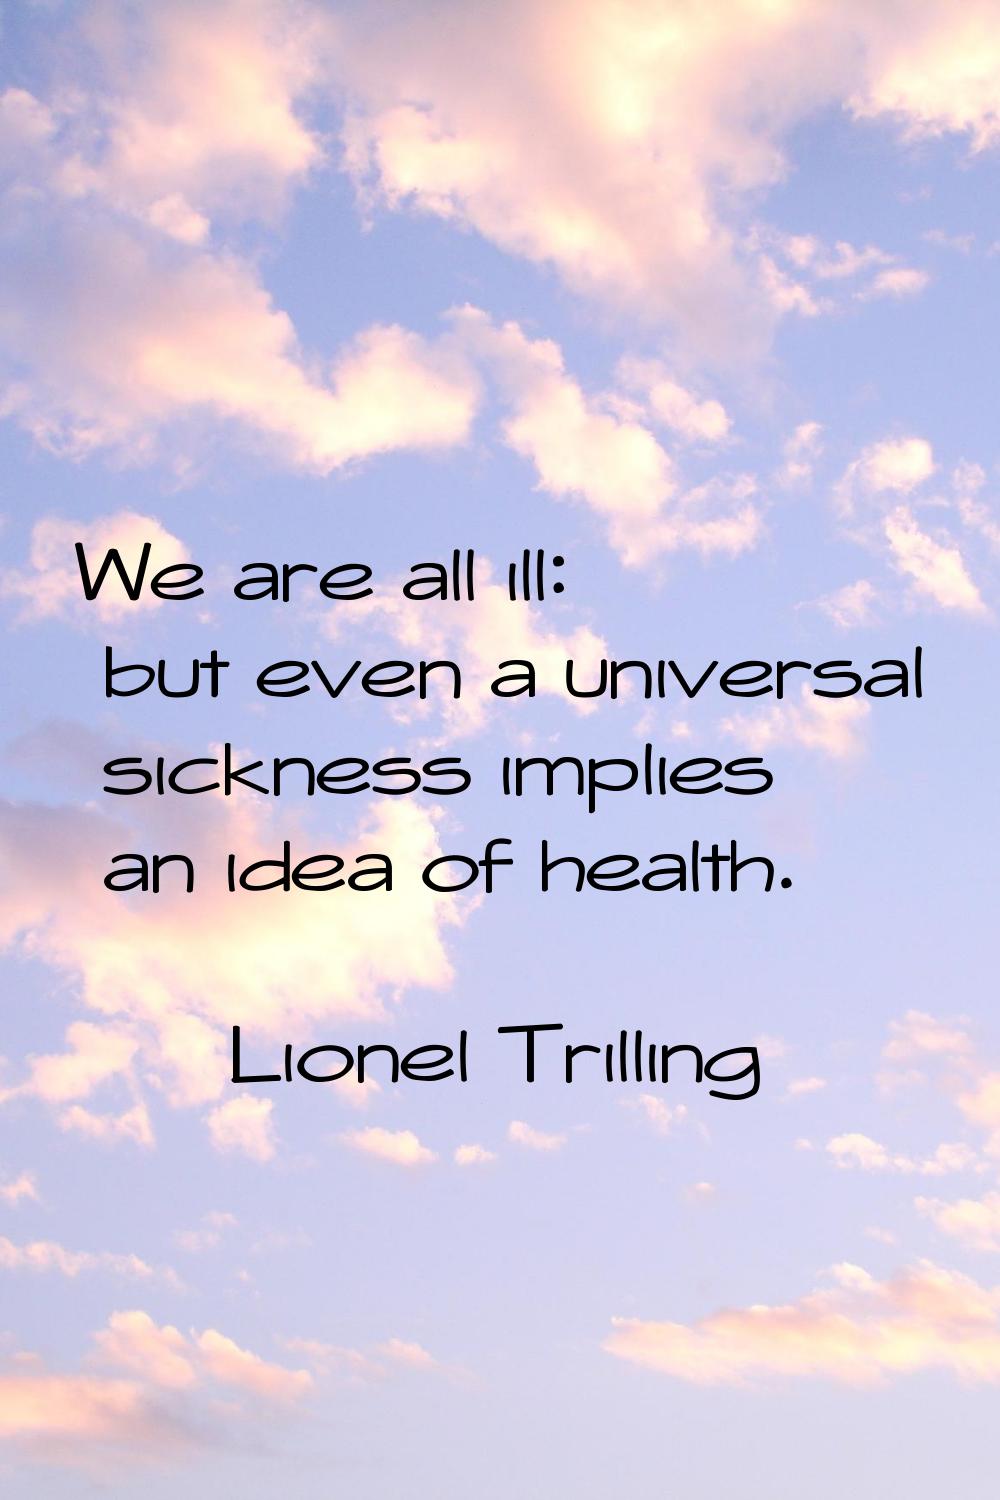 We are all ill: but even a universal sickness implies an idea of health.